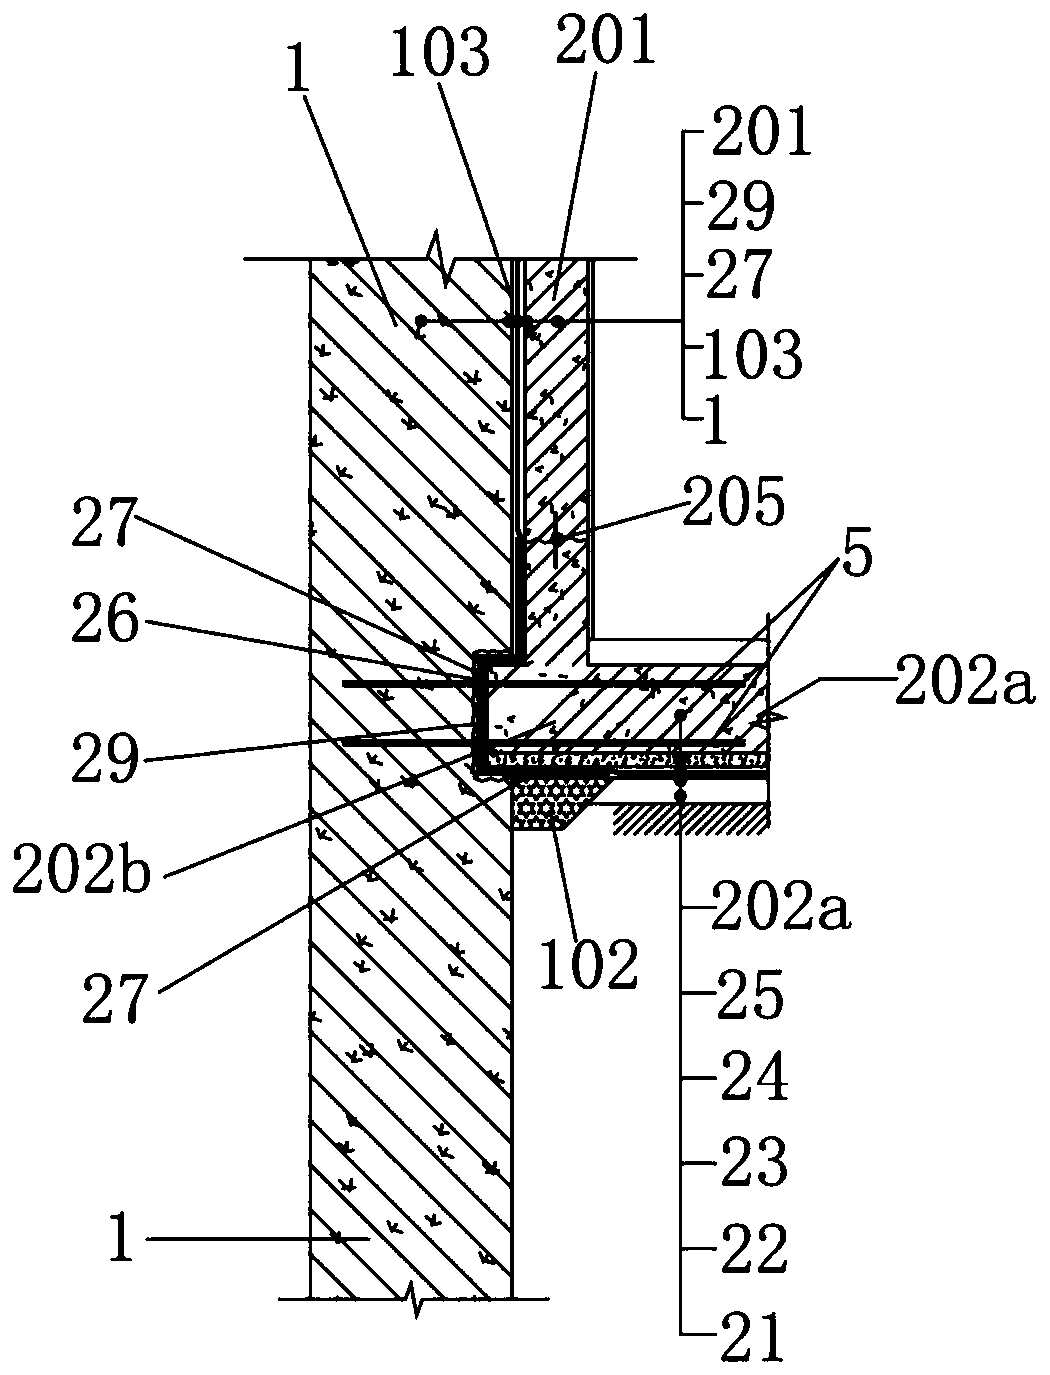 Construction method of basement pile-wall integrated structure system